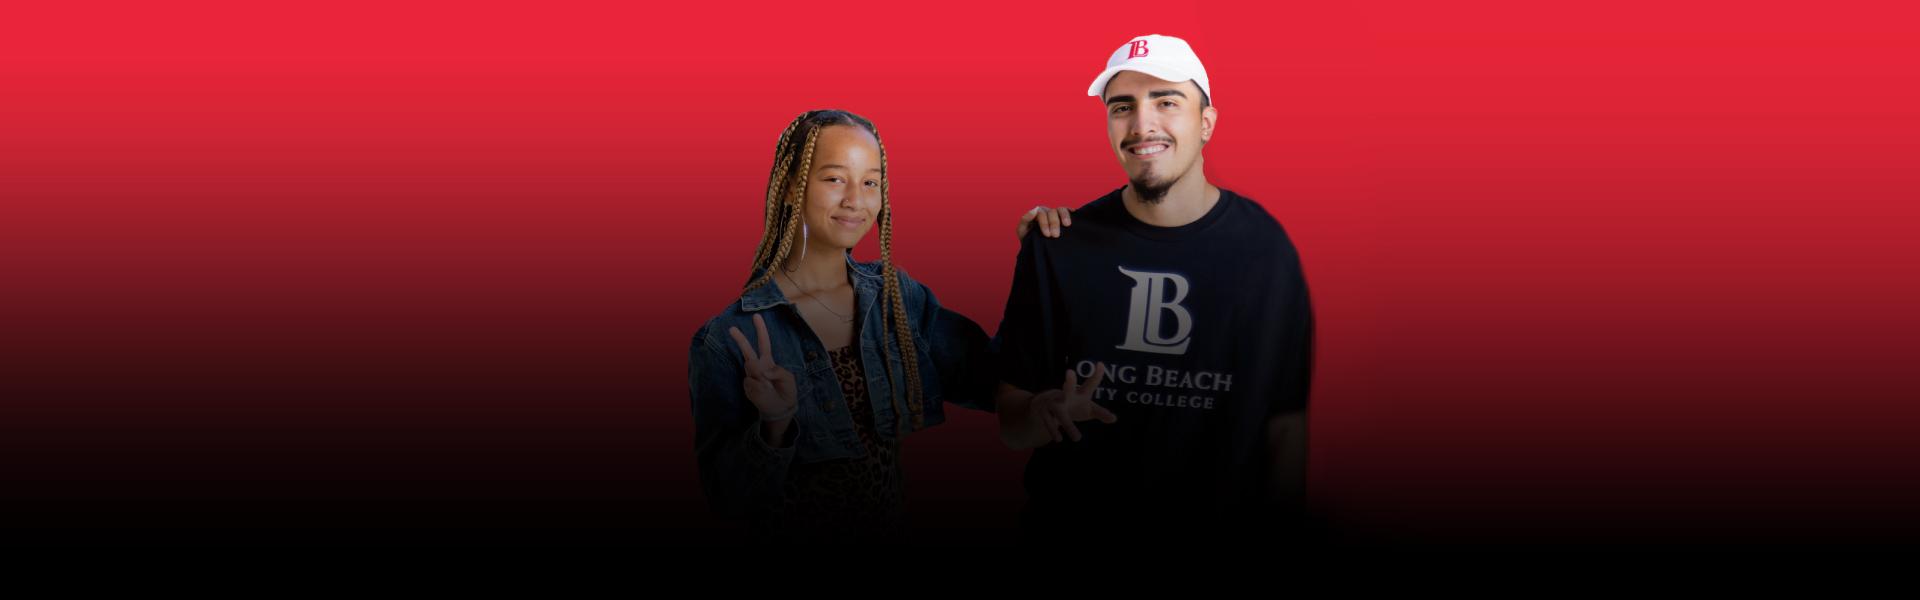 two young Long Beach City College smiling with their fingers show V's as Vitory signs